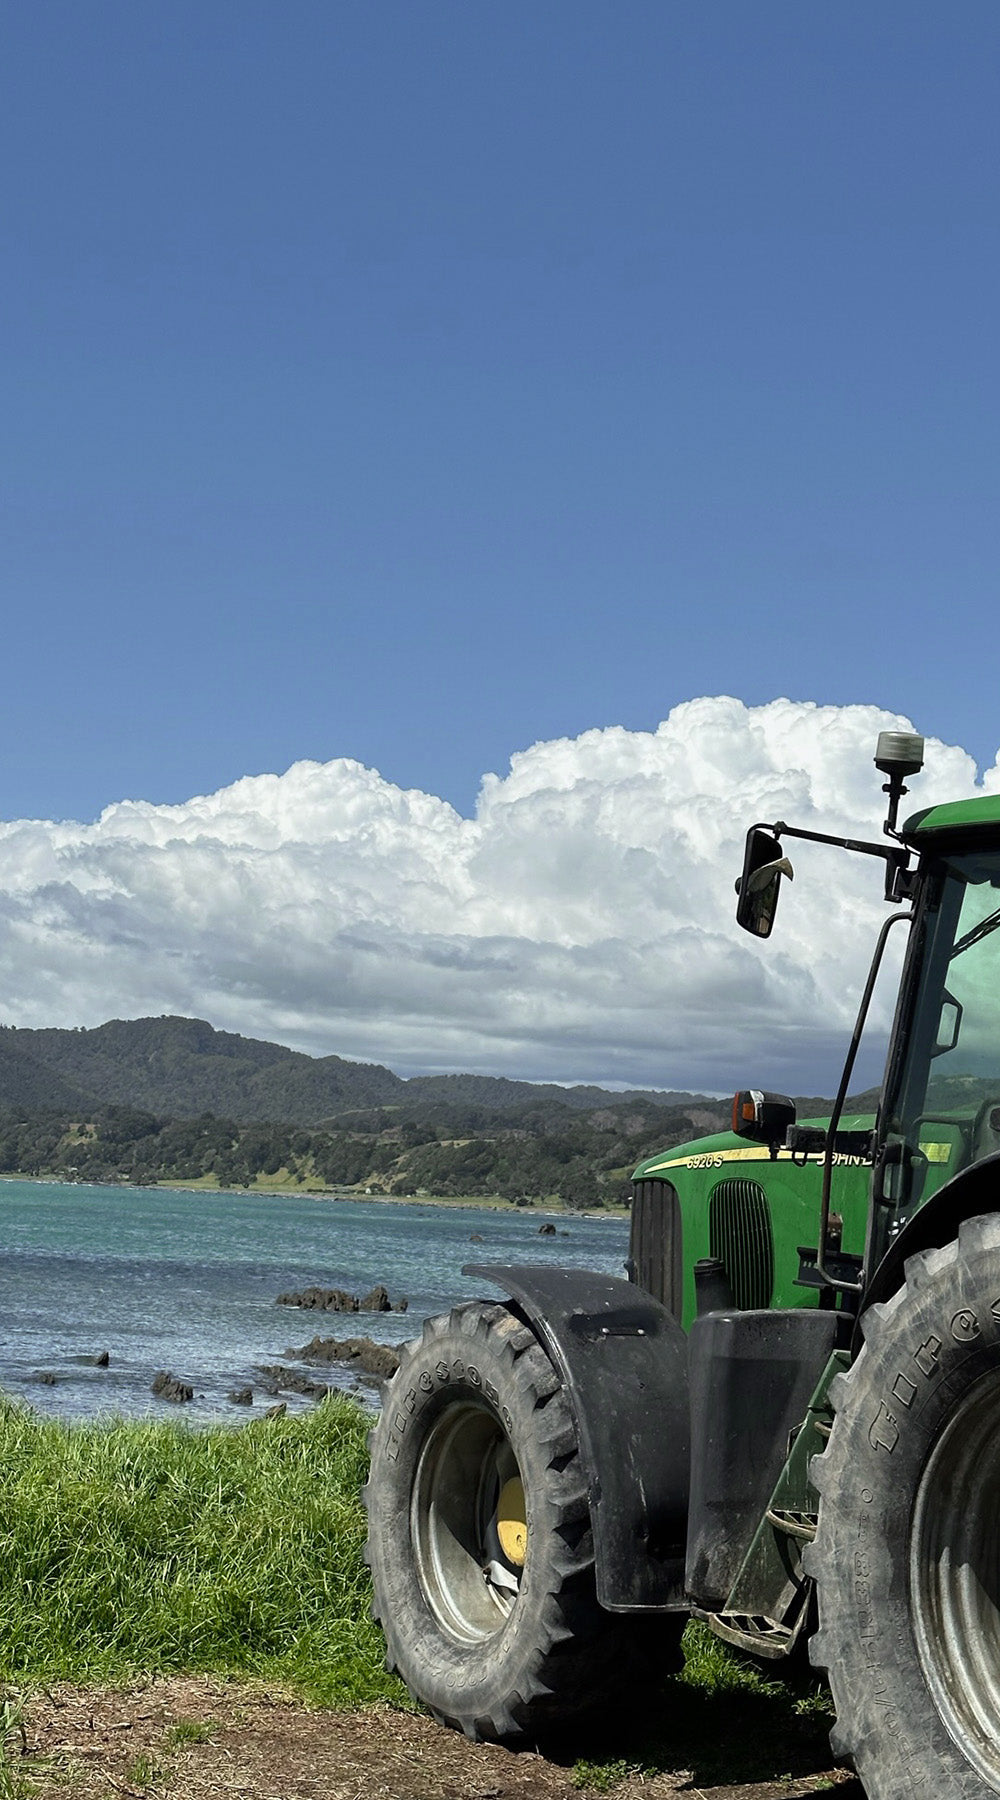  A tractor on a farm with the ocean in the distance